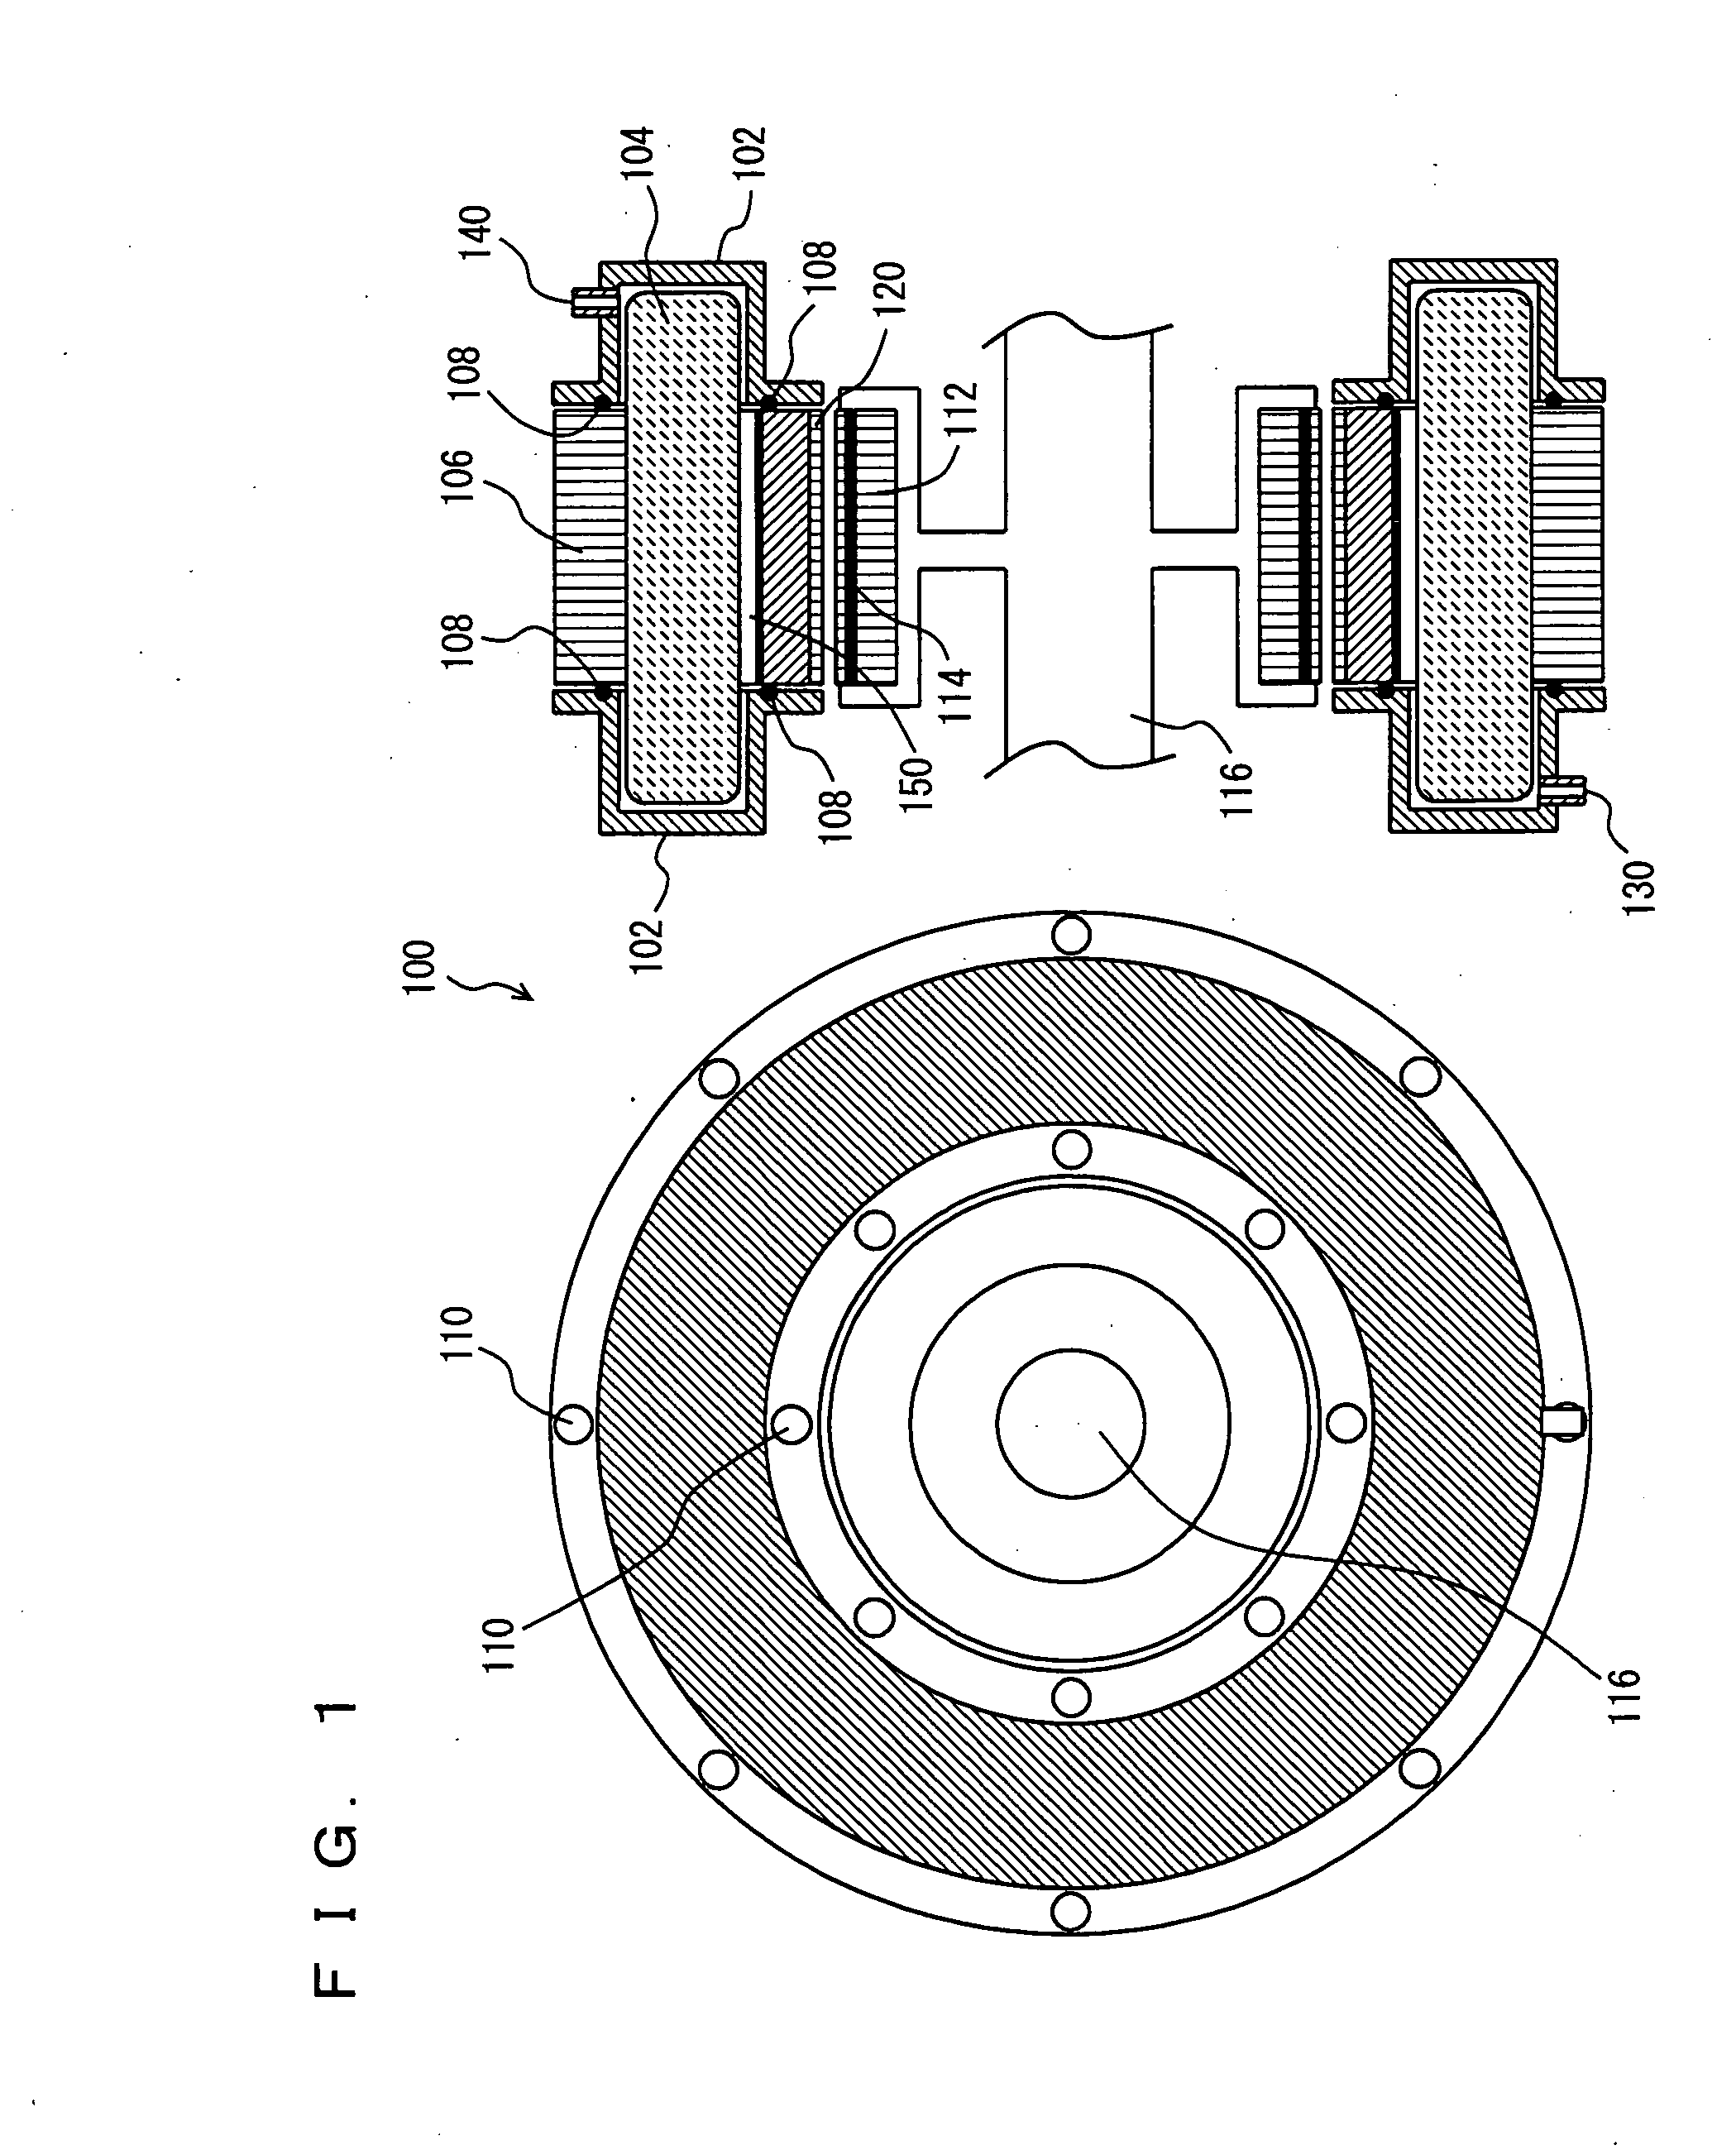 Motor for vehicle